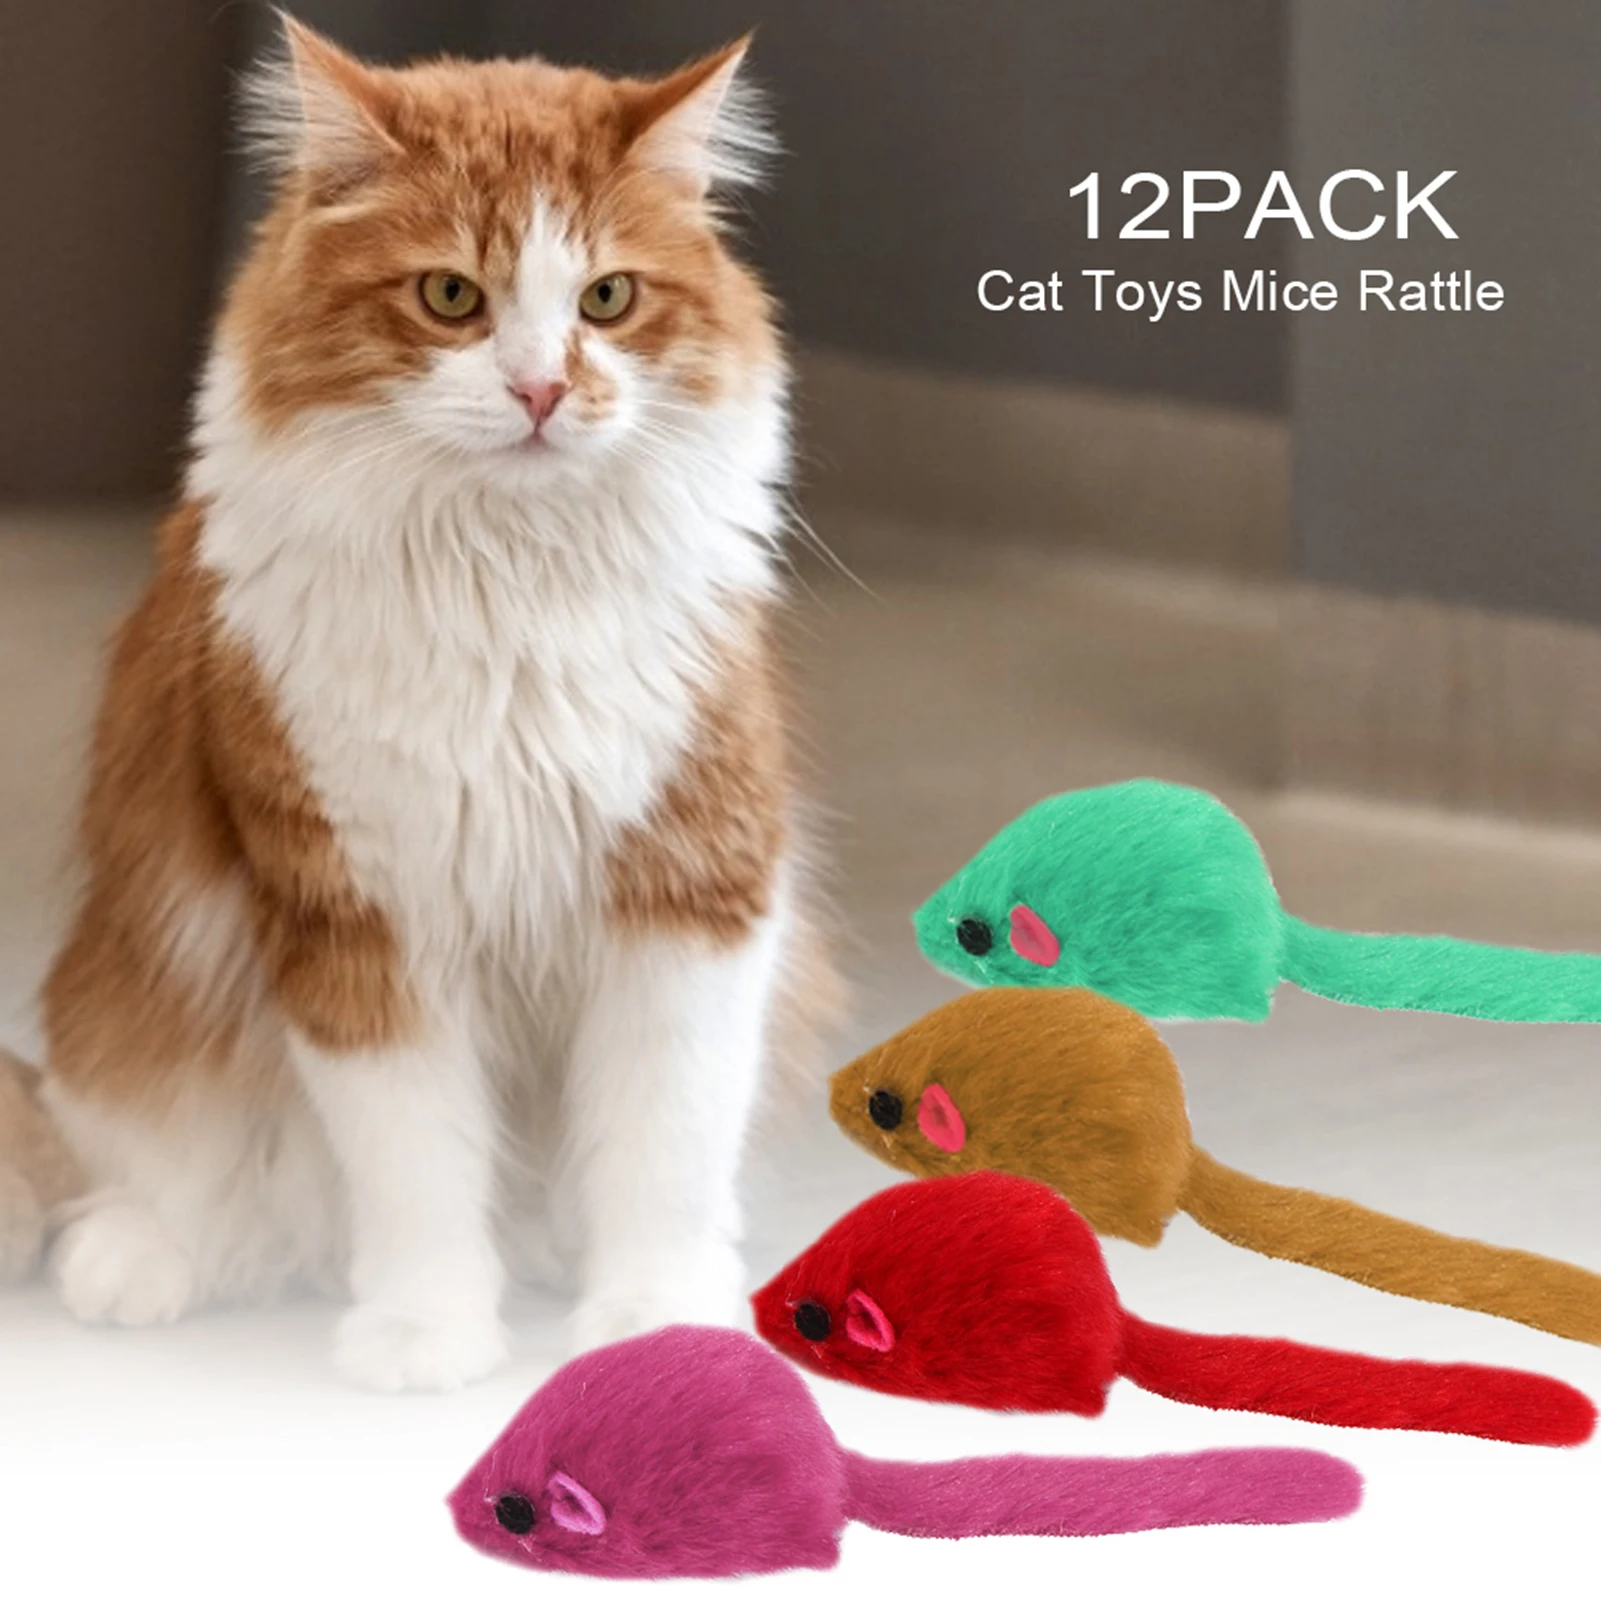 

12PCS Cat Toy Mouse Toys Cats Teaser Kitty Kitten Funny Sound Squeaky Toy For Pets Interactive Game False Mouse Pet Toy Supplies